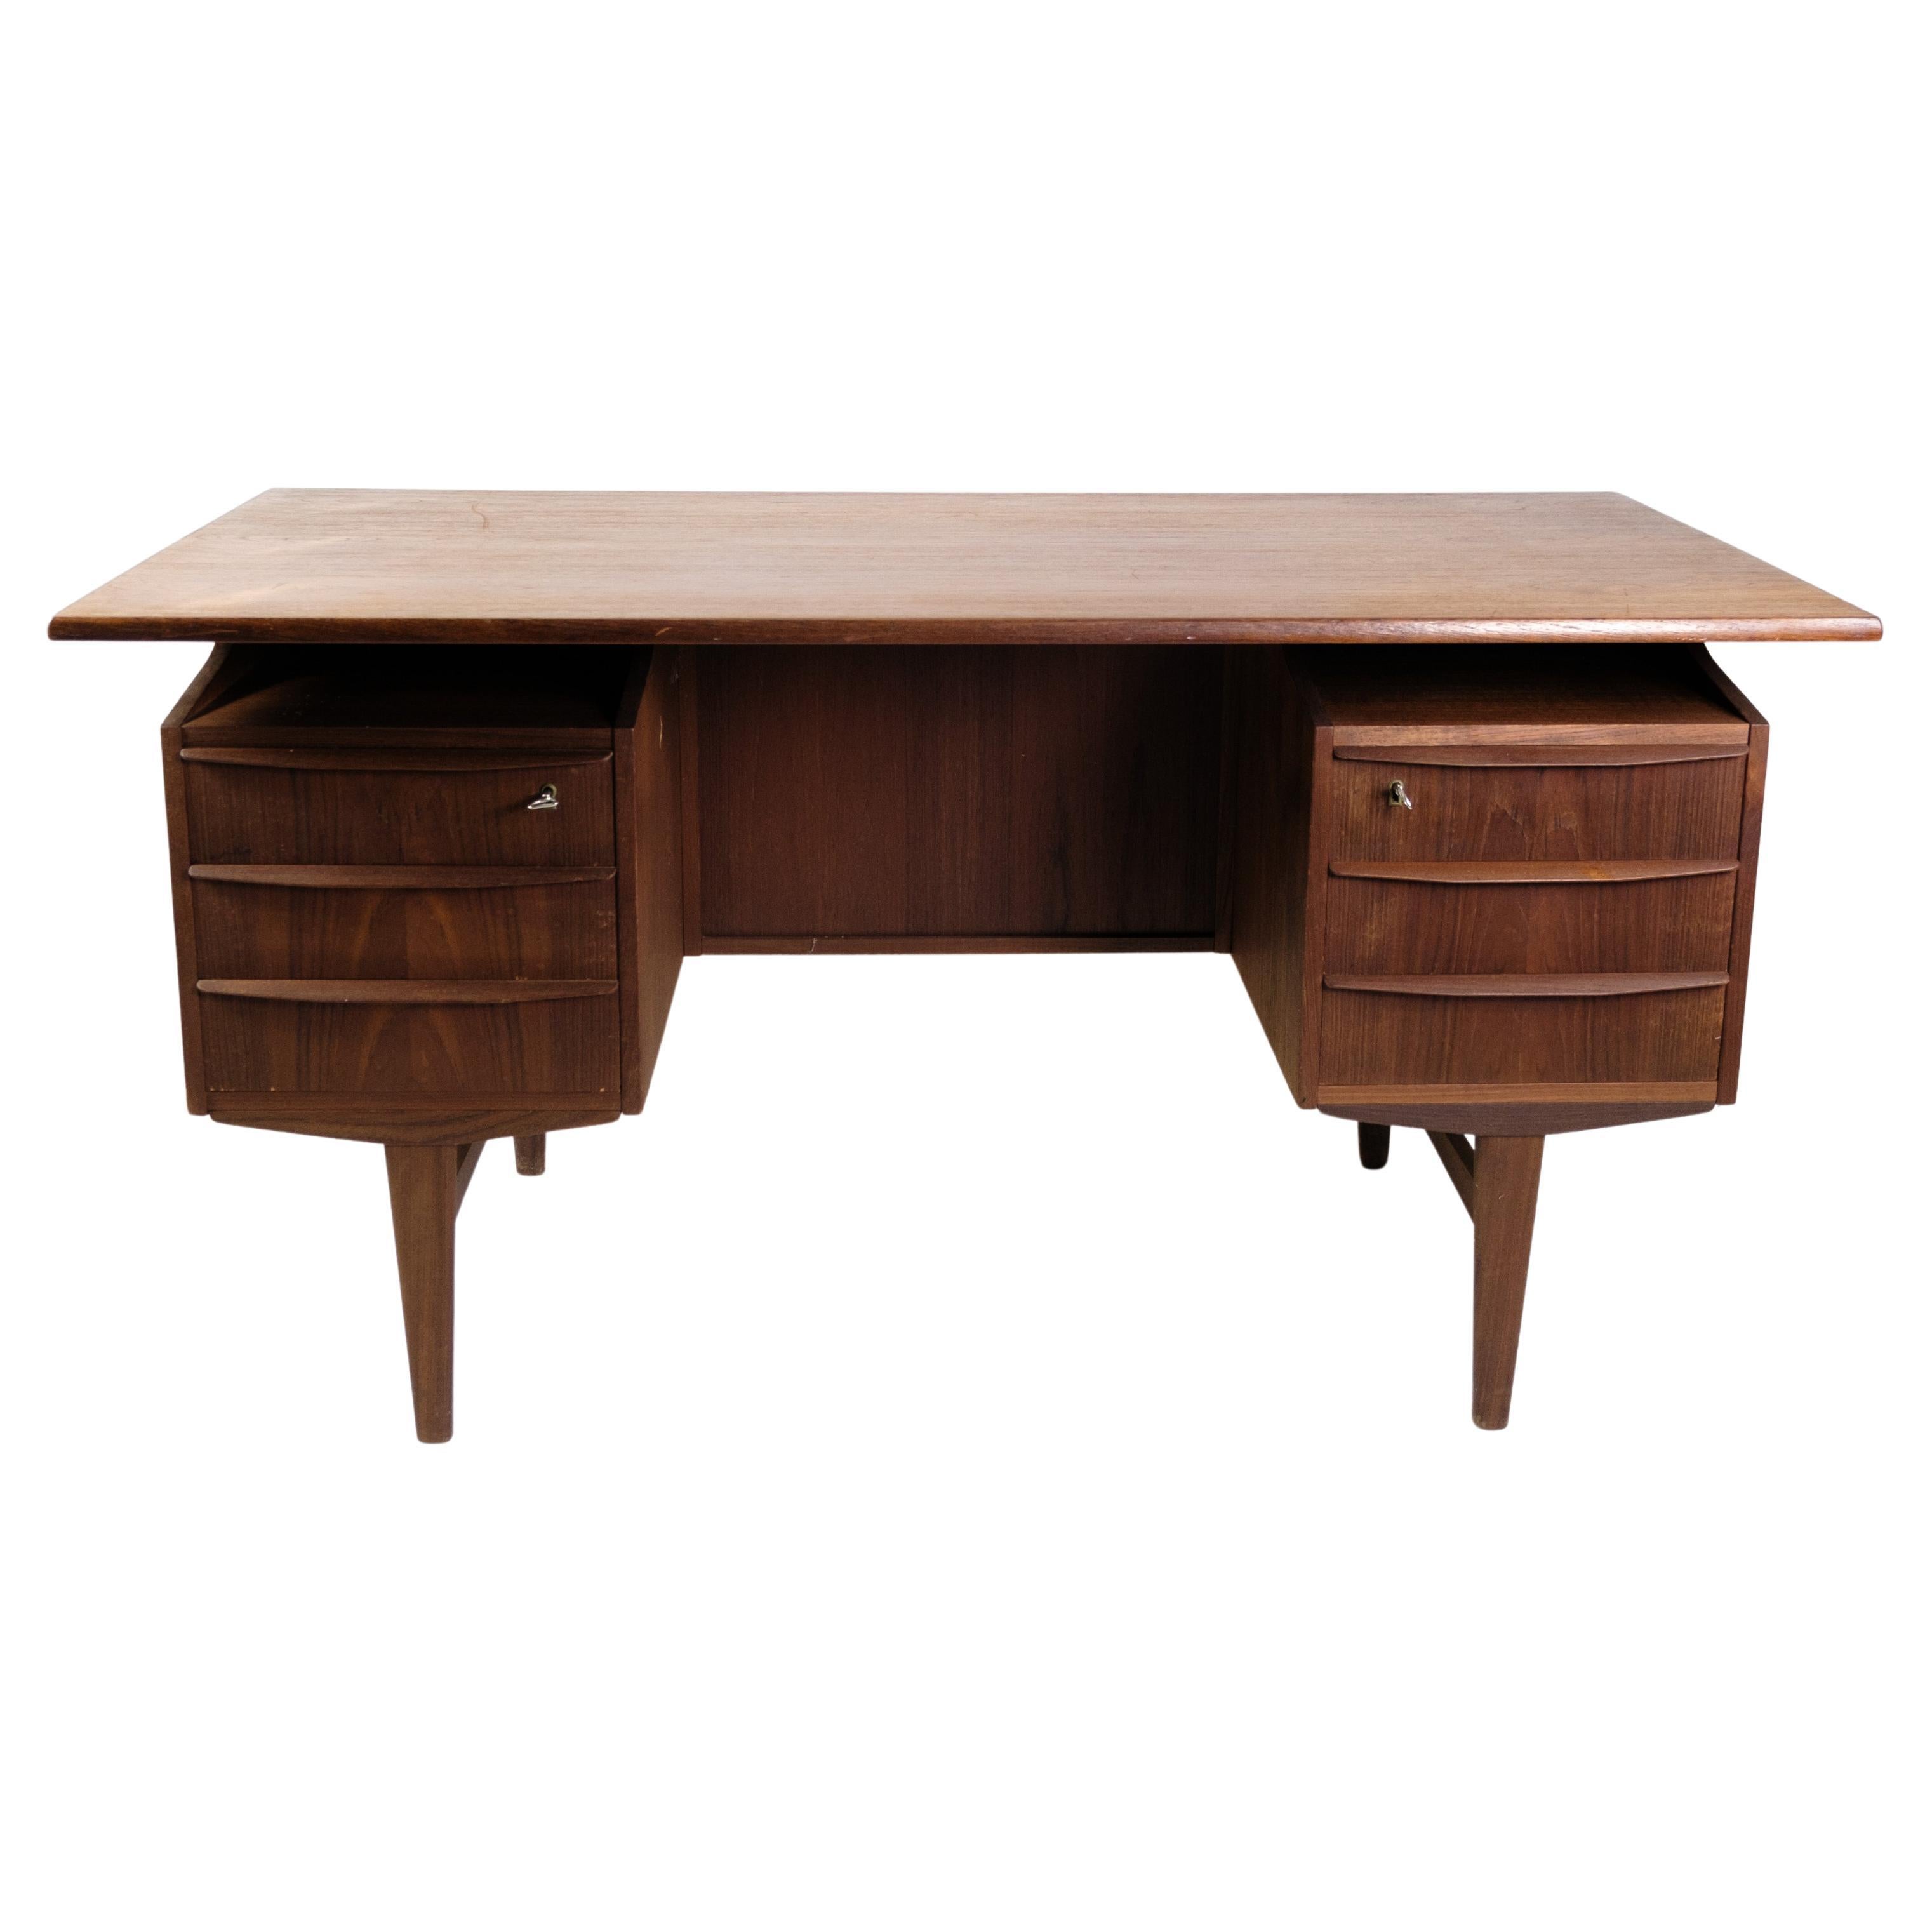 Desk Made In Teak Designed With A Floating TableTop From 1960s For Sale